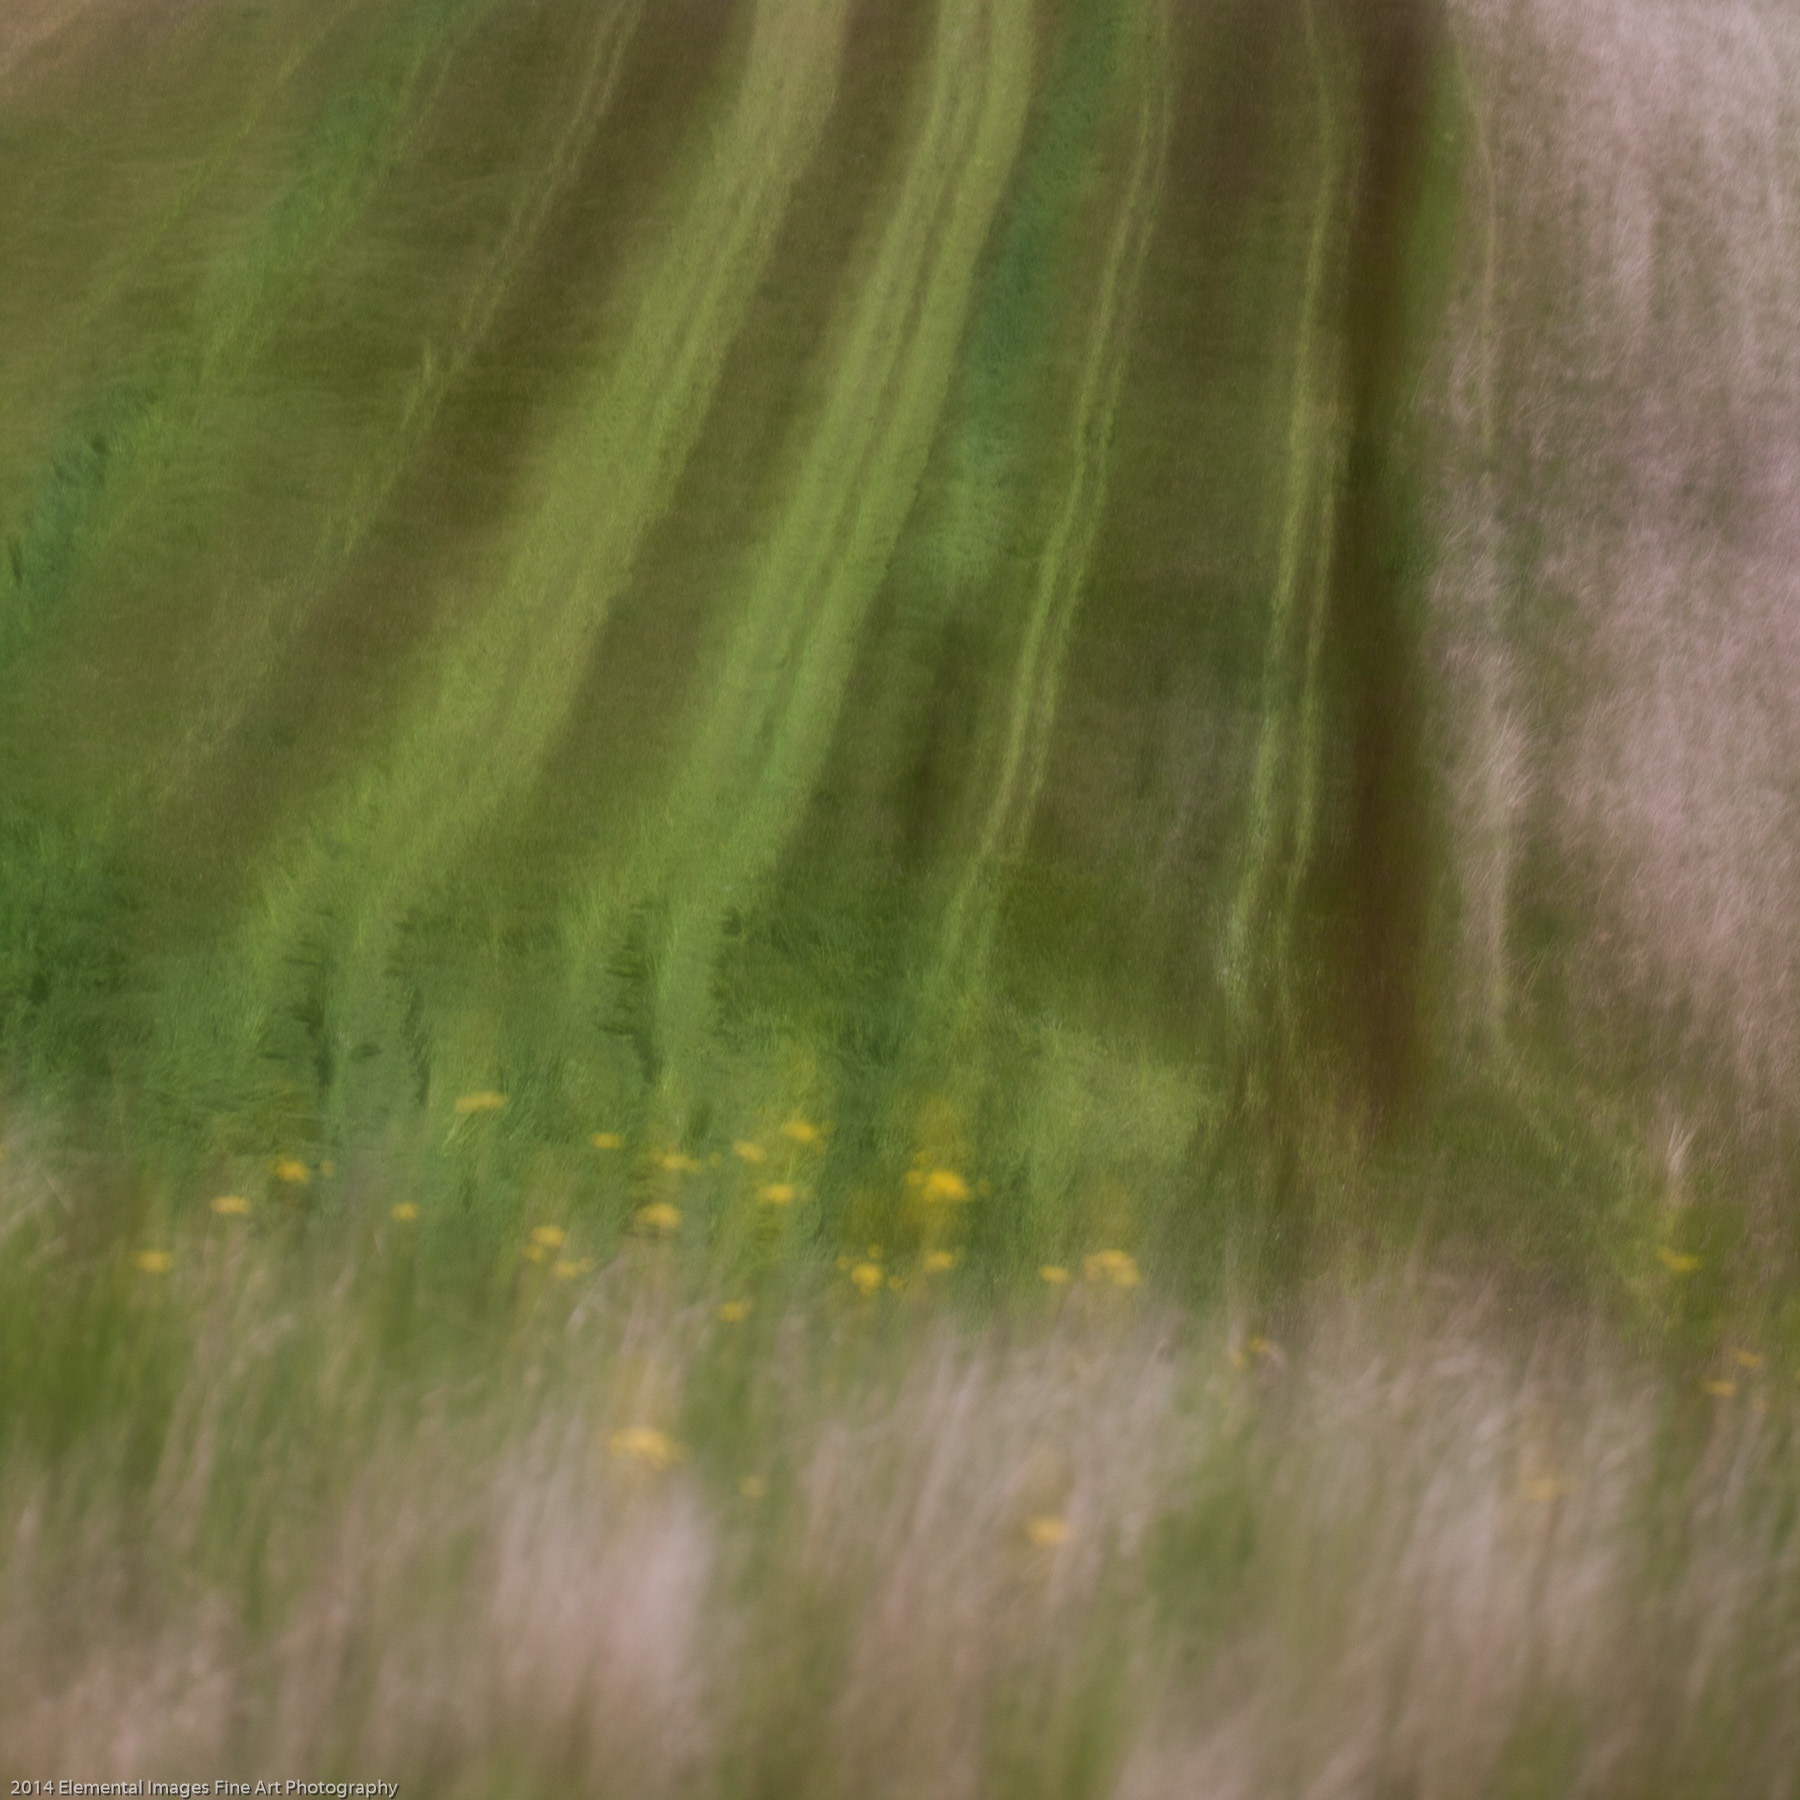 Palouse LXV | The Palouse | WA | USA - © 2014 Elemental Images Fine Art Photography - All Rights Reserved Worldwide